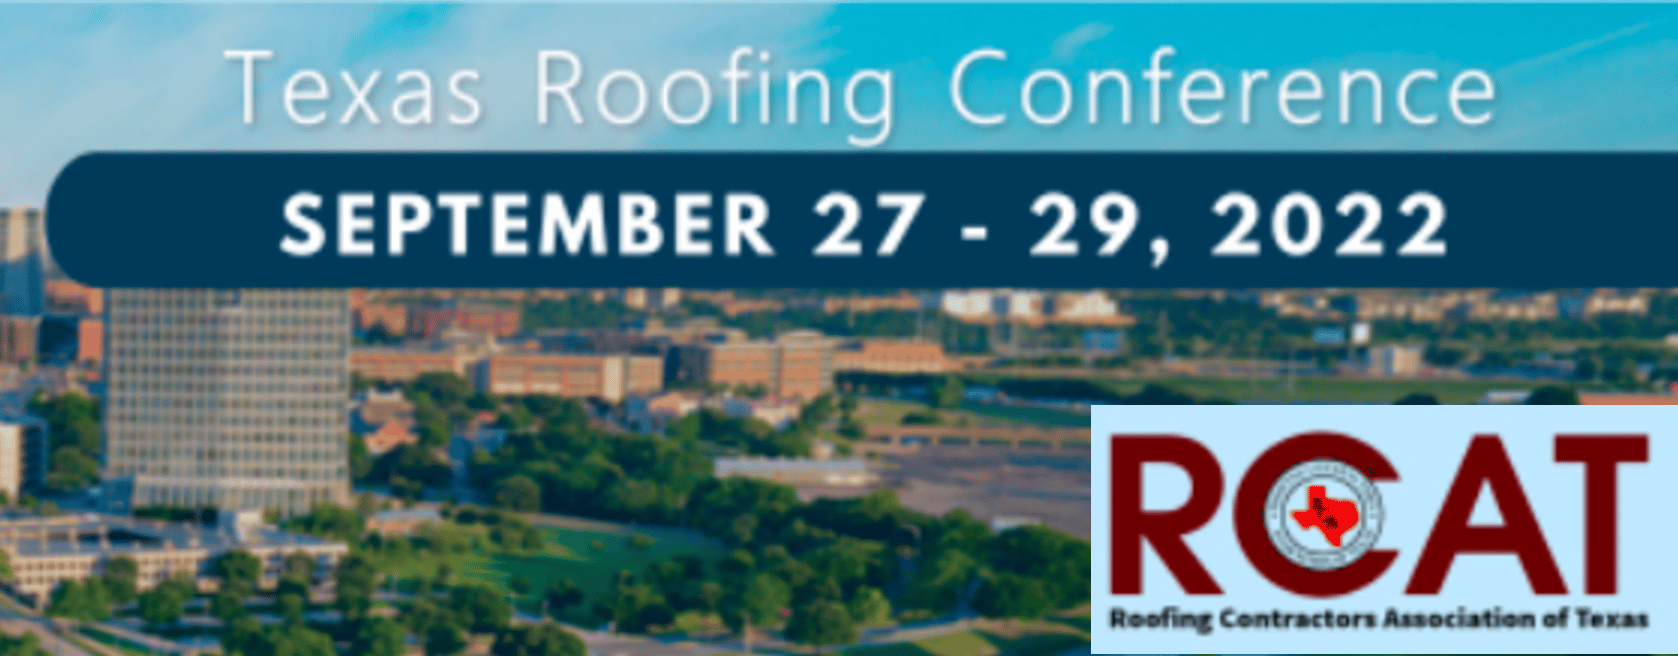 RCAT 2022 Texas Roofing Conference in Fort Worth, TX